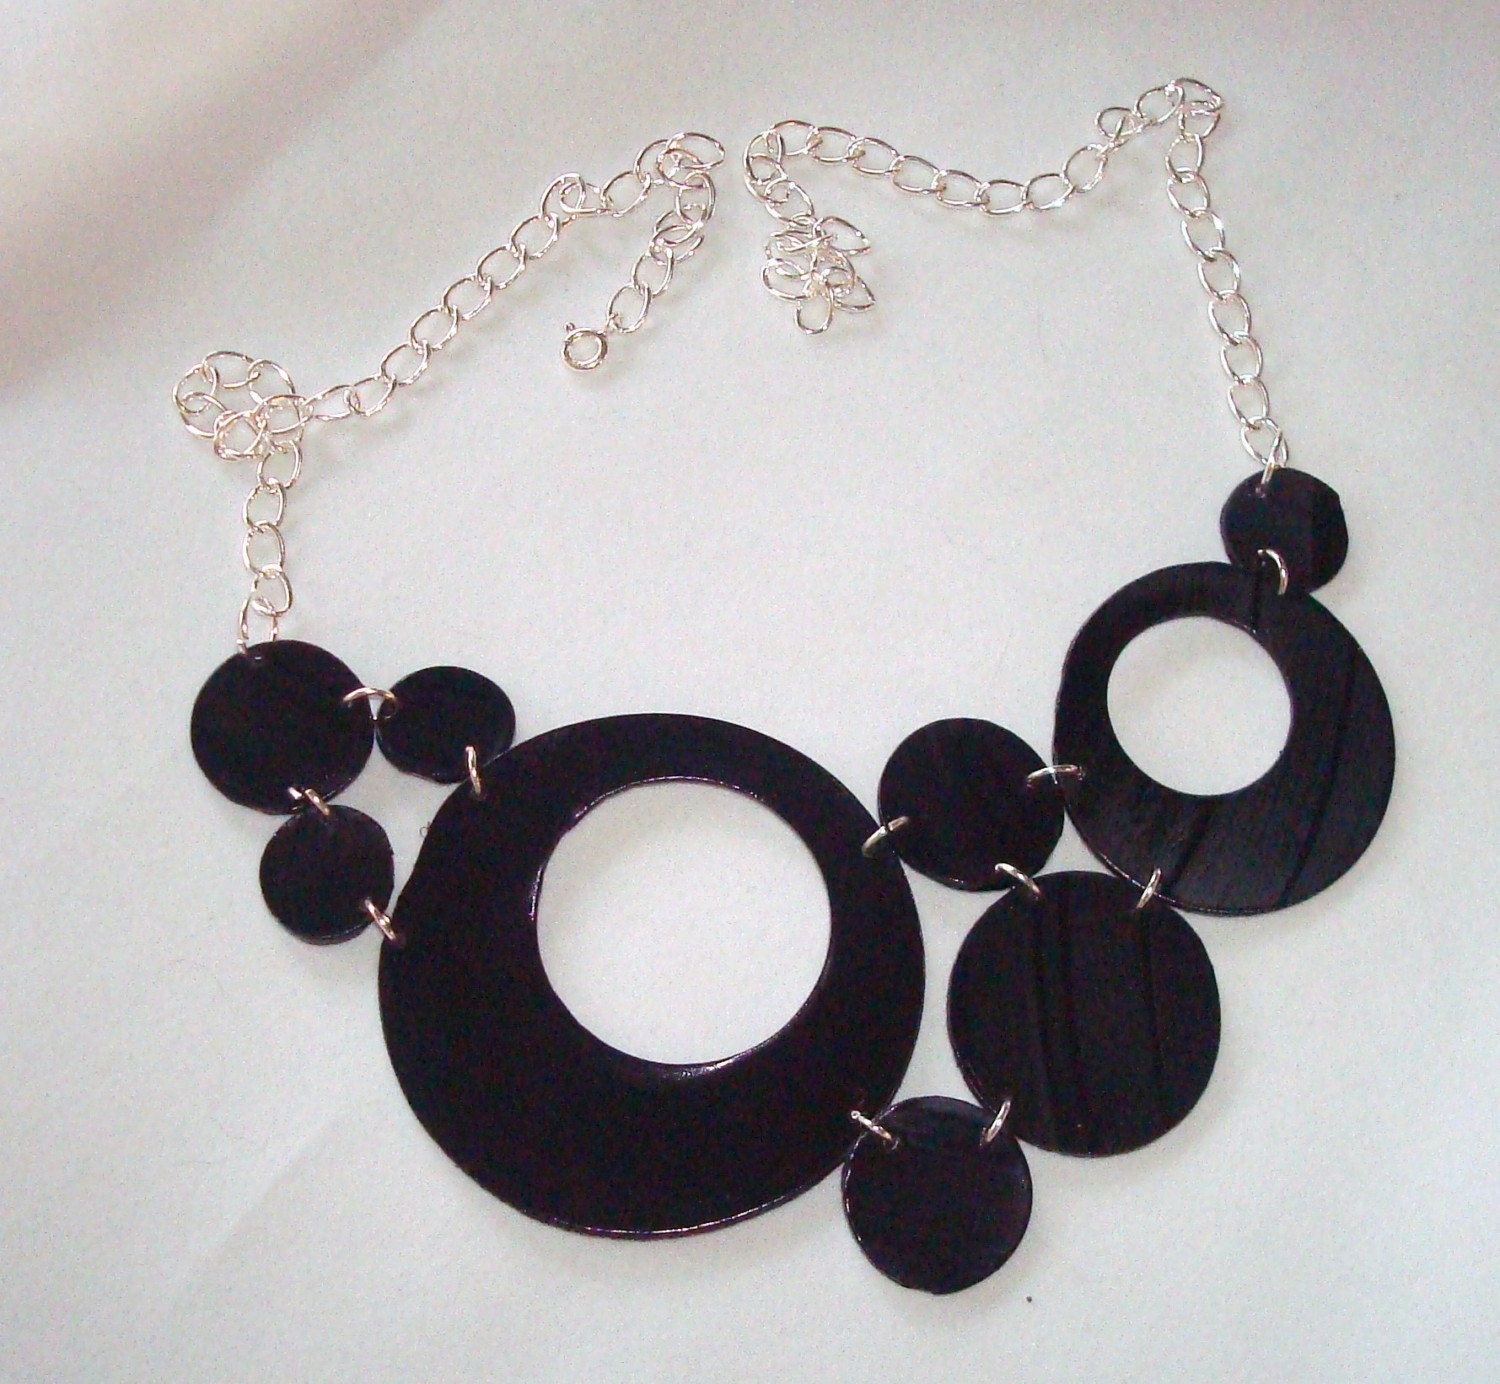 Bubbles upcycled record vinyl necklace